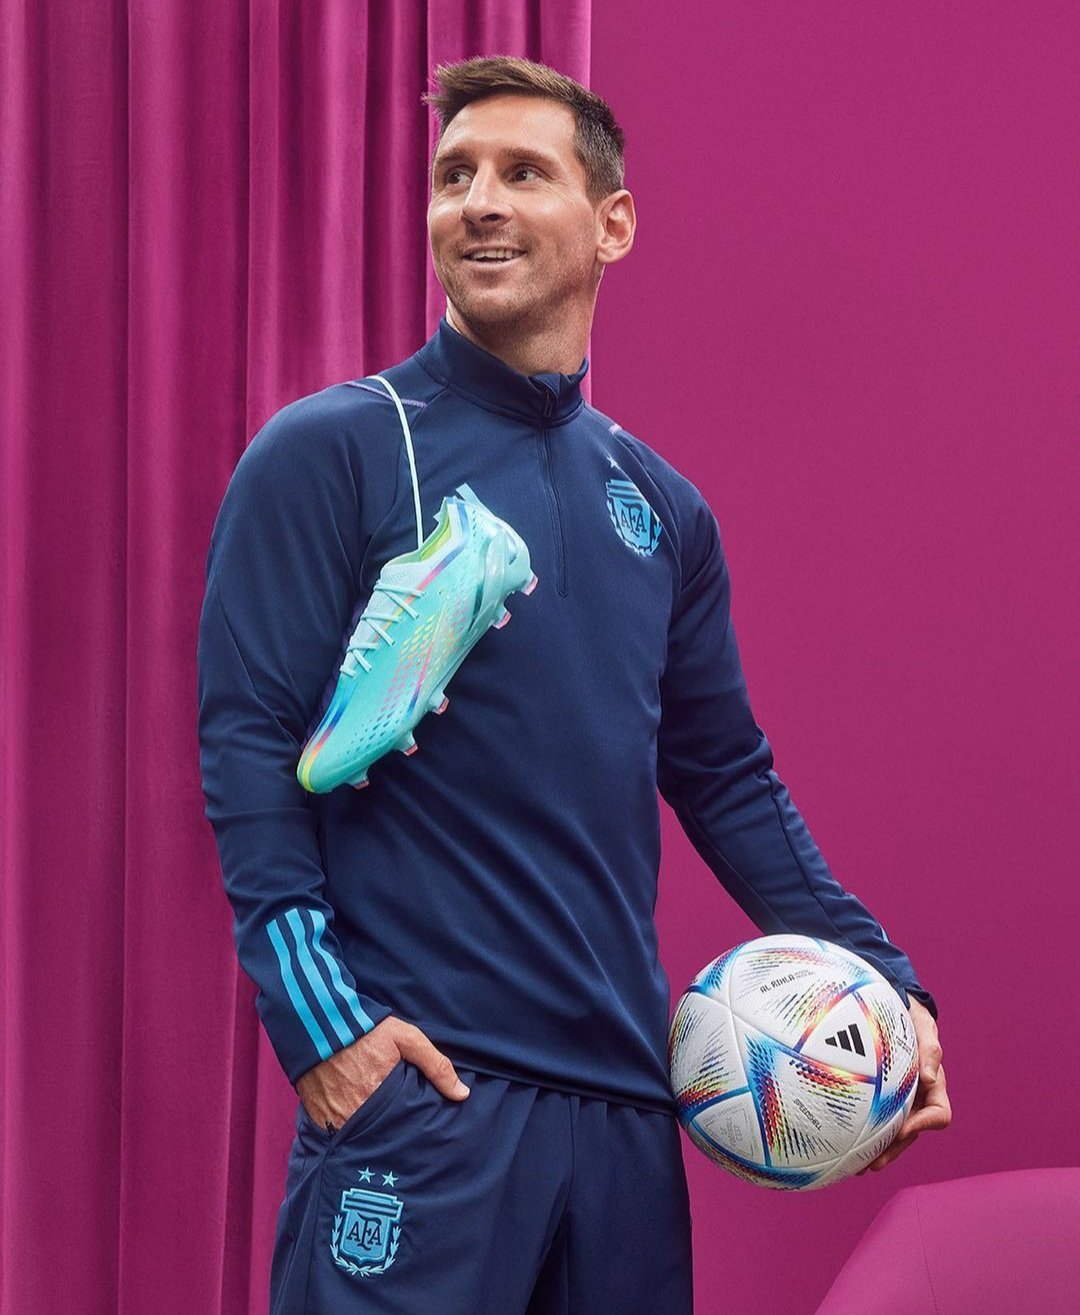 Roy Nemer on Twitter: "Lionel Messi in a new Adidas track suit. 🇦🇷 https://t.co/dBUCHIDryJ" / Twitter